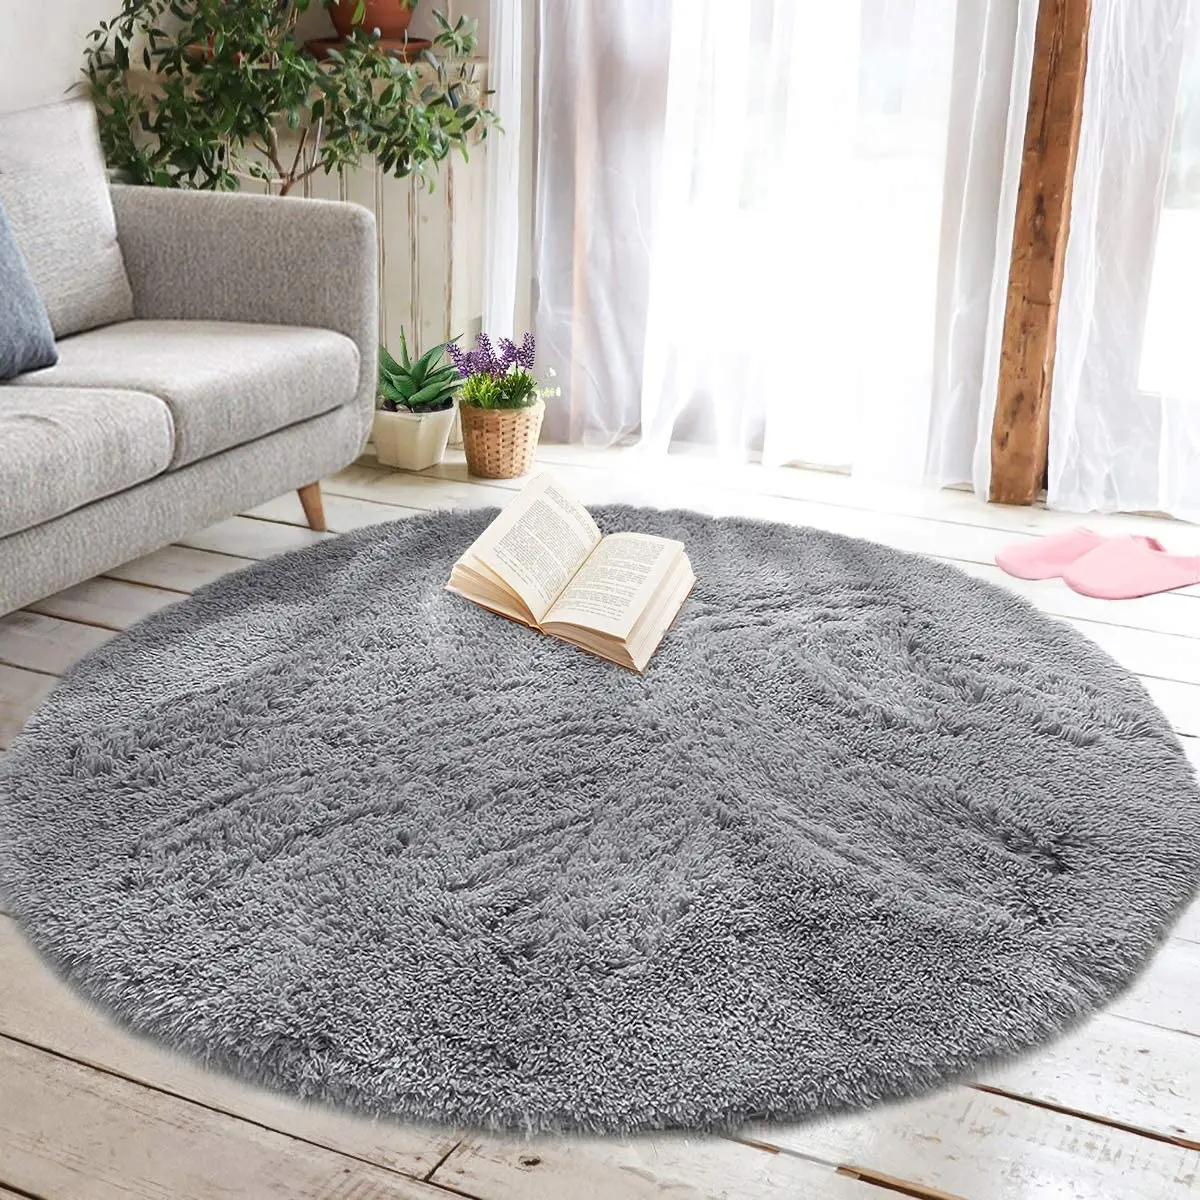 Thick Soft Round Fluffy Rugs Carpets For Living Room Plush Rug Bedroom Fur Long Pile Carpet Floor Mat Soft Shaggy Rugs Home Mat